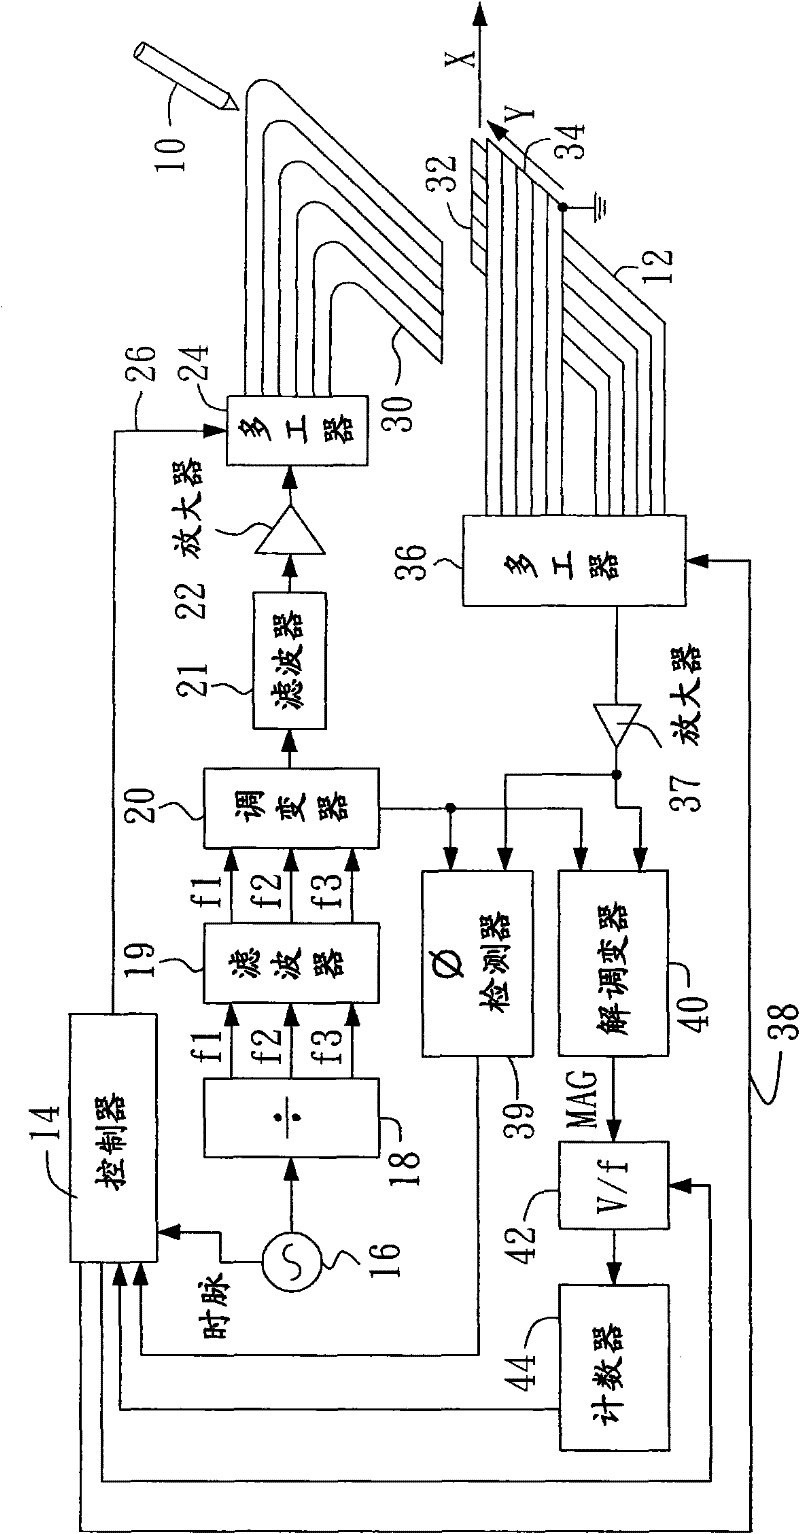 Handwriting input device with electromagnetic energy transmission